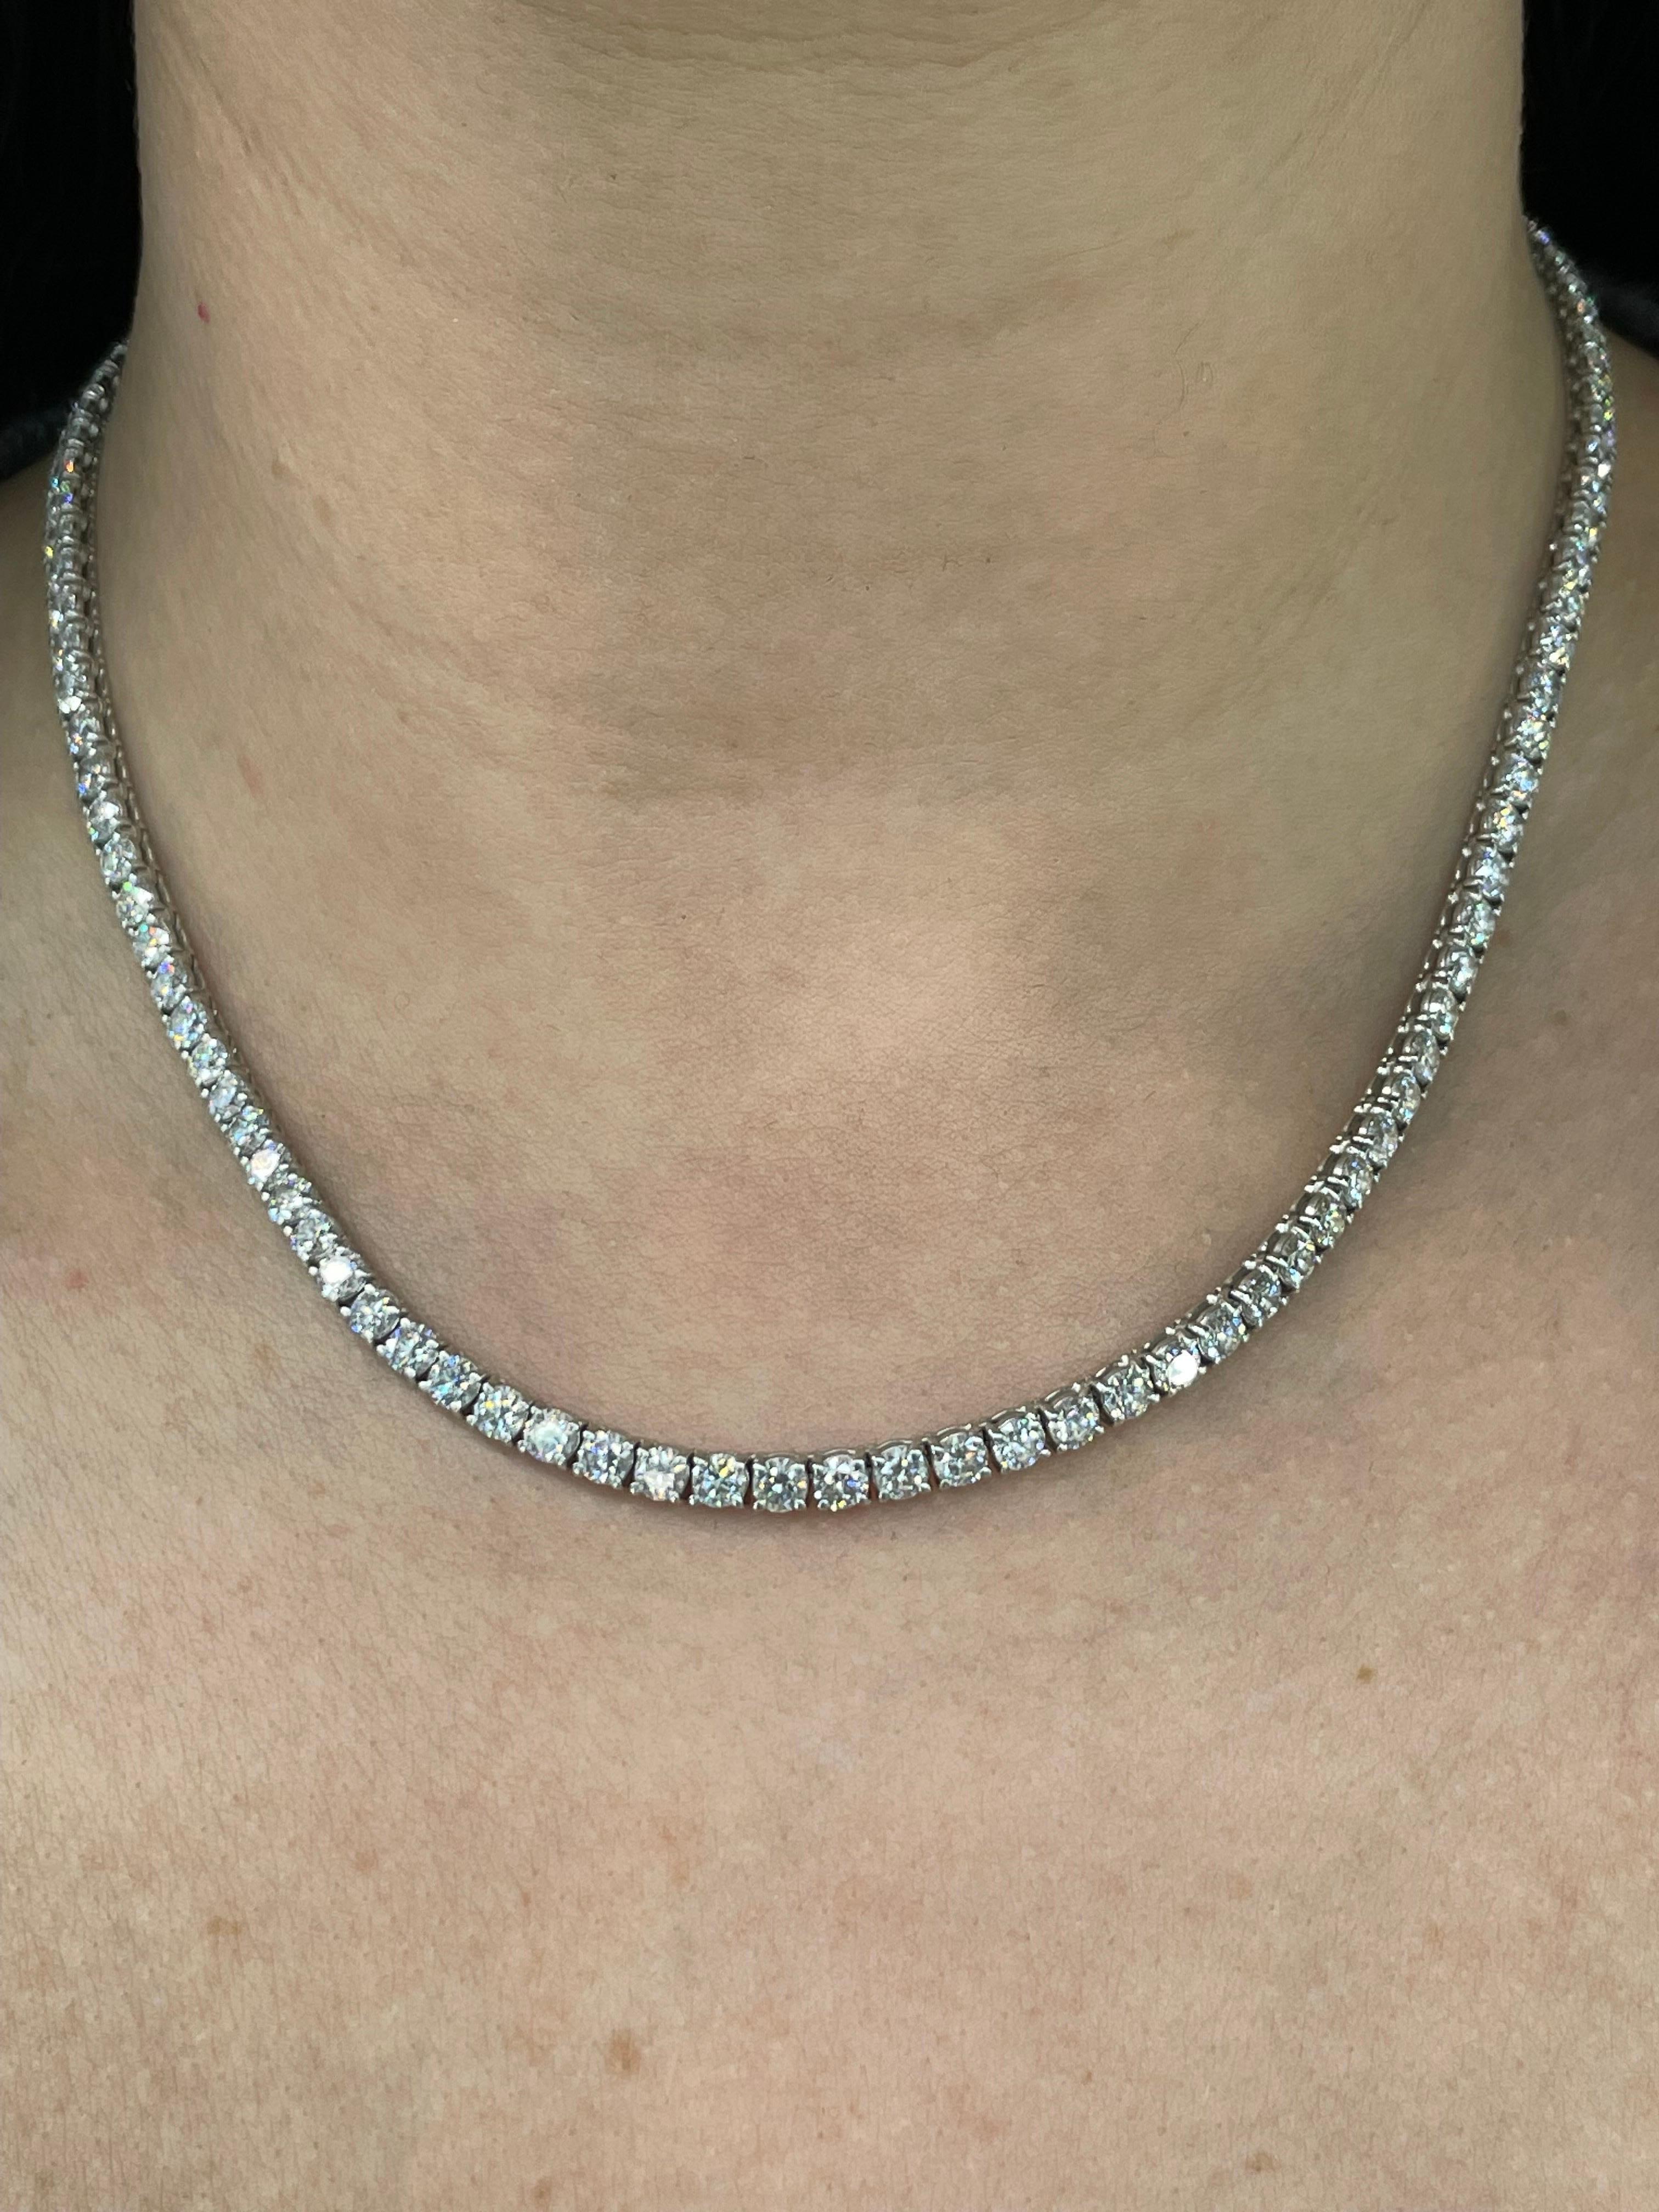 Diamonds Straight Line Necklace 17.25 Carats 14k White Gold 0.15 PTS For Sale 3